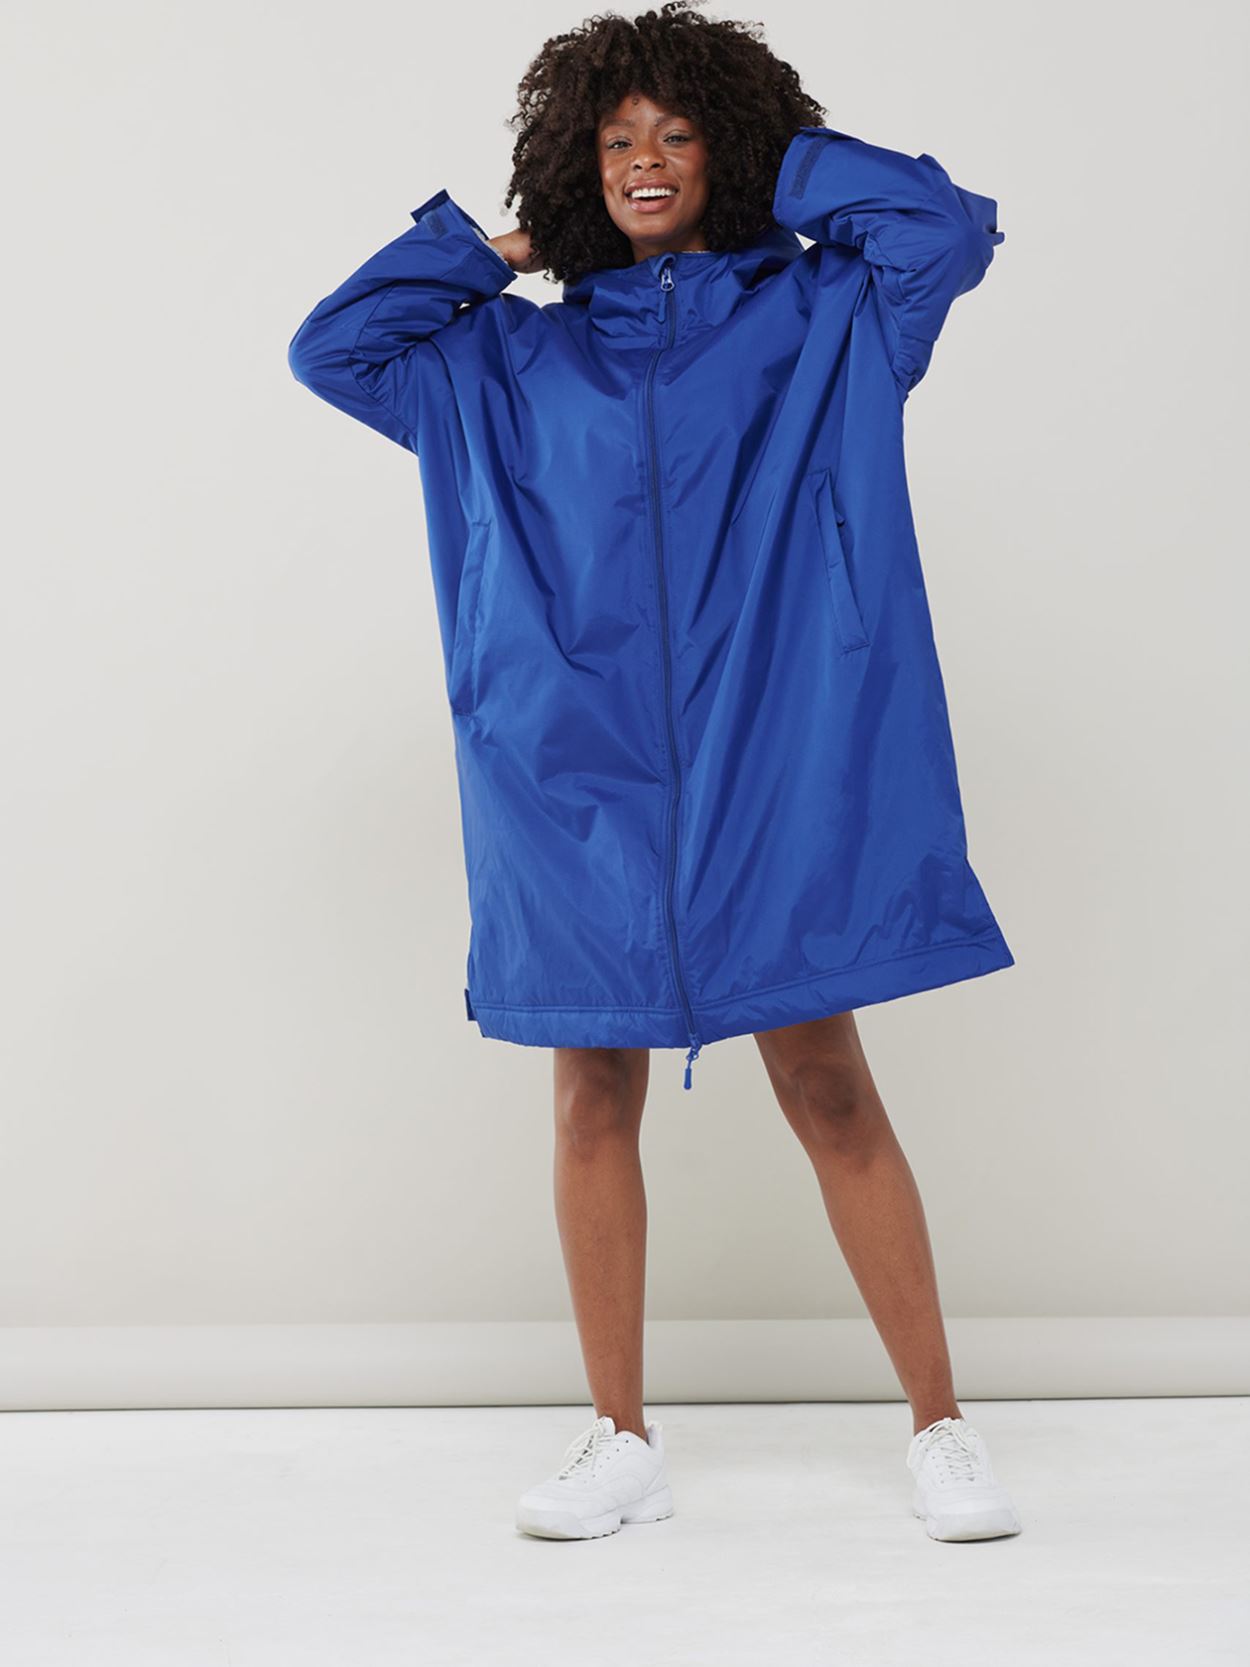 LV690 Adults All Weather Robe Image 3 Thumbnail